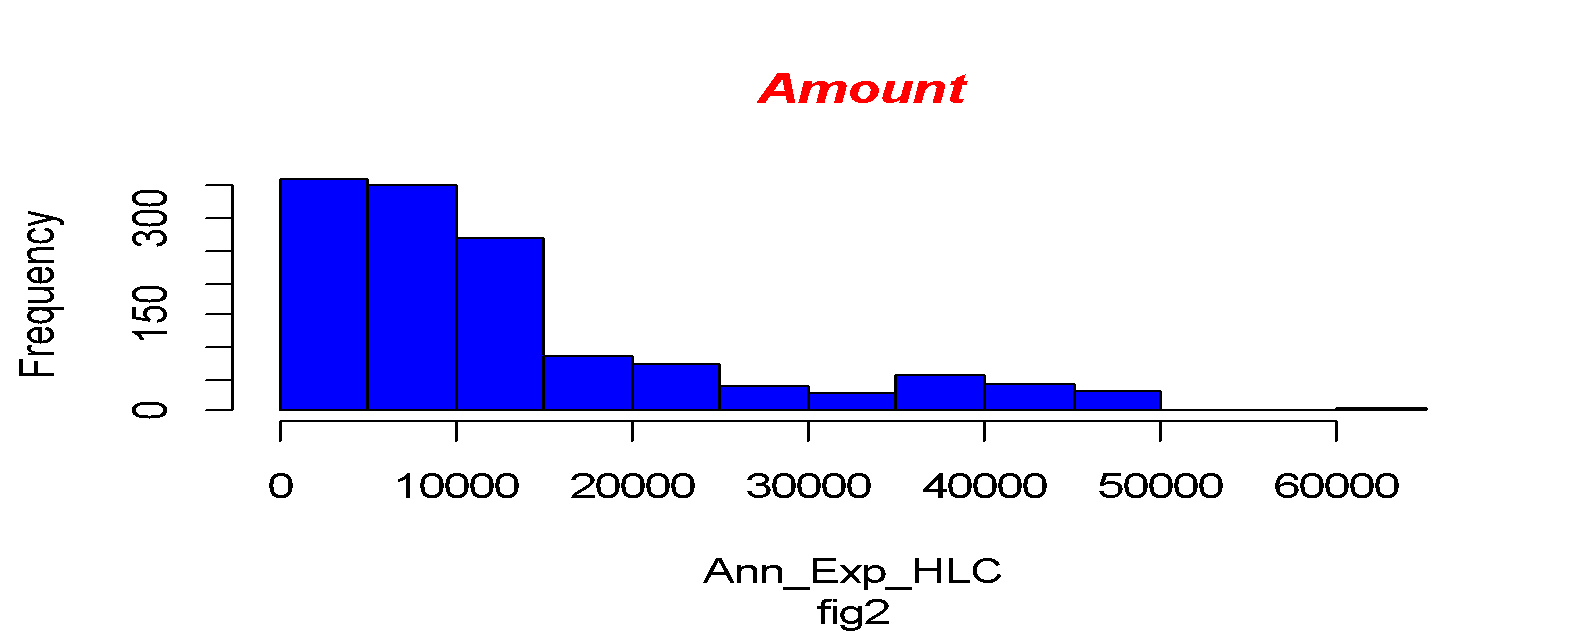 Annual expenditure versus frequency